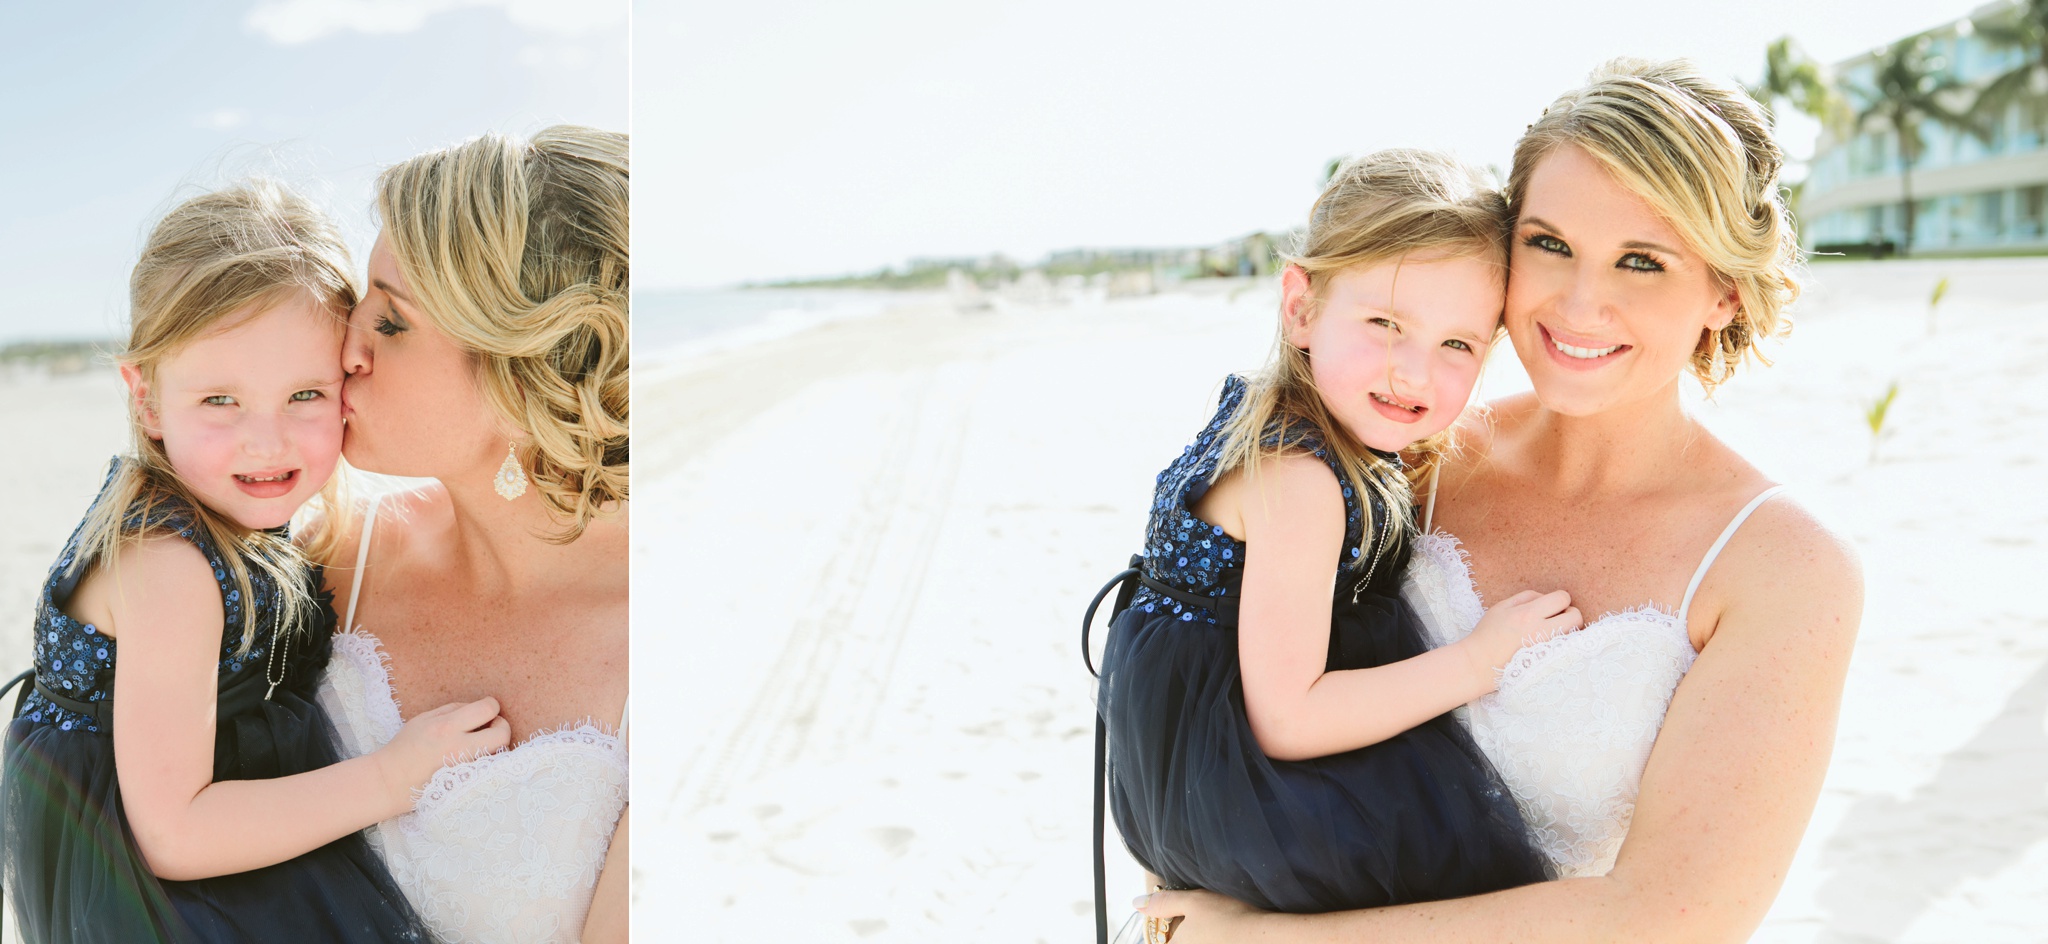 Moon Palace Resort Cancun Mexico Wedding Photos Bride and Flower Girl Daughter